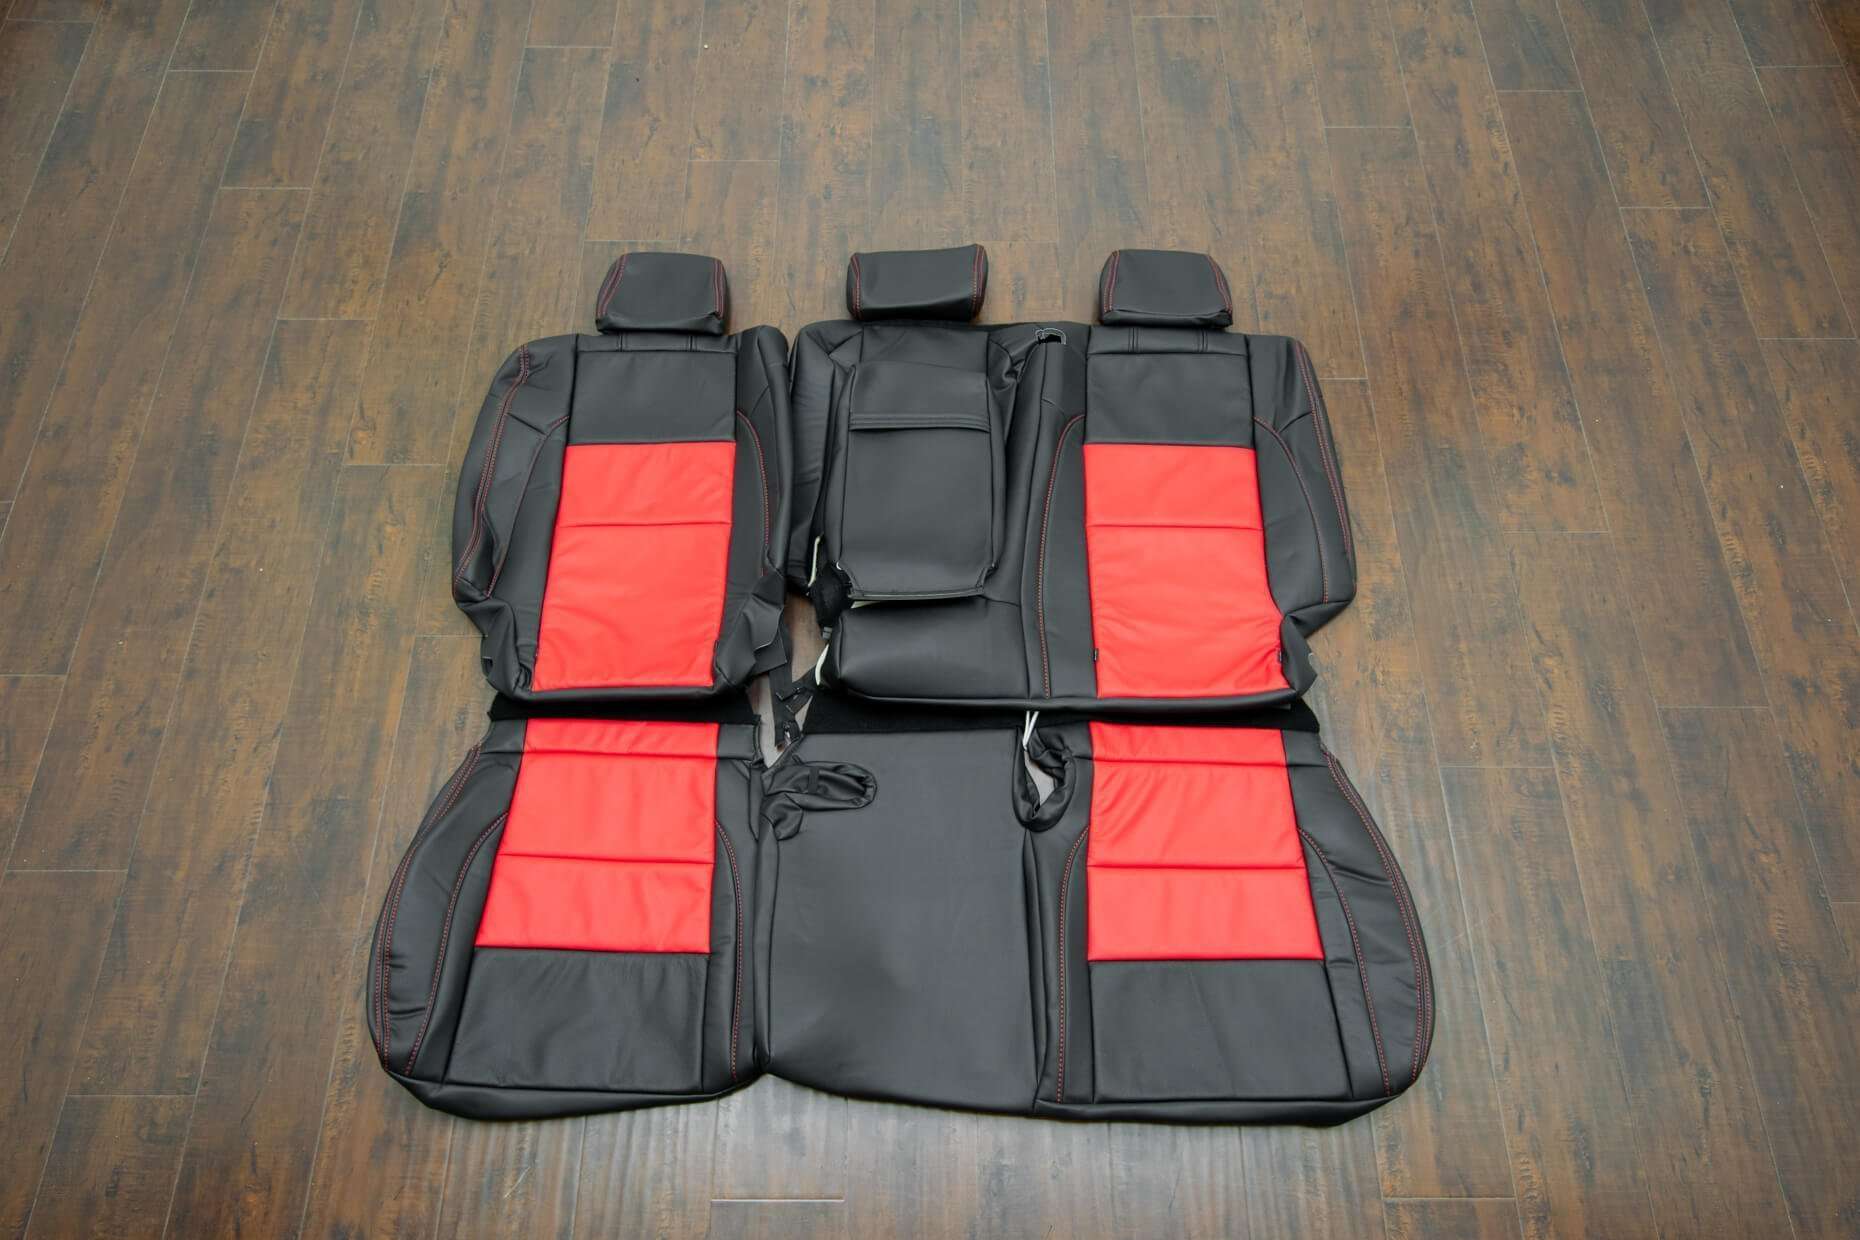 2011-2018 Dodge Durango Upholstery Kit- Black & Bright Red - Back seats with armrest